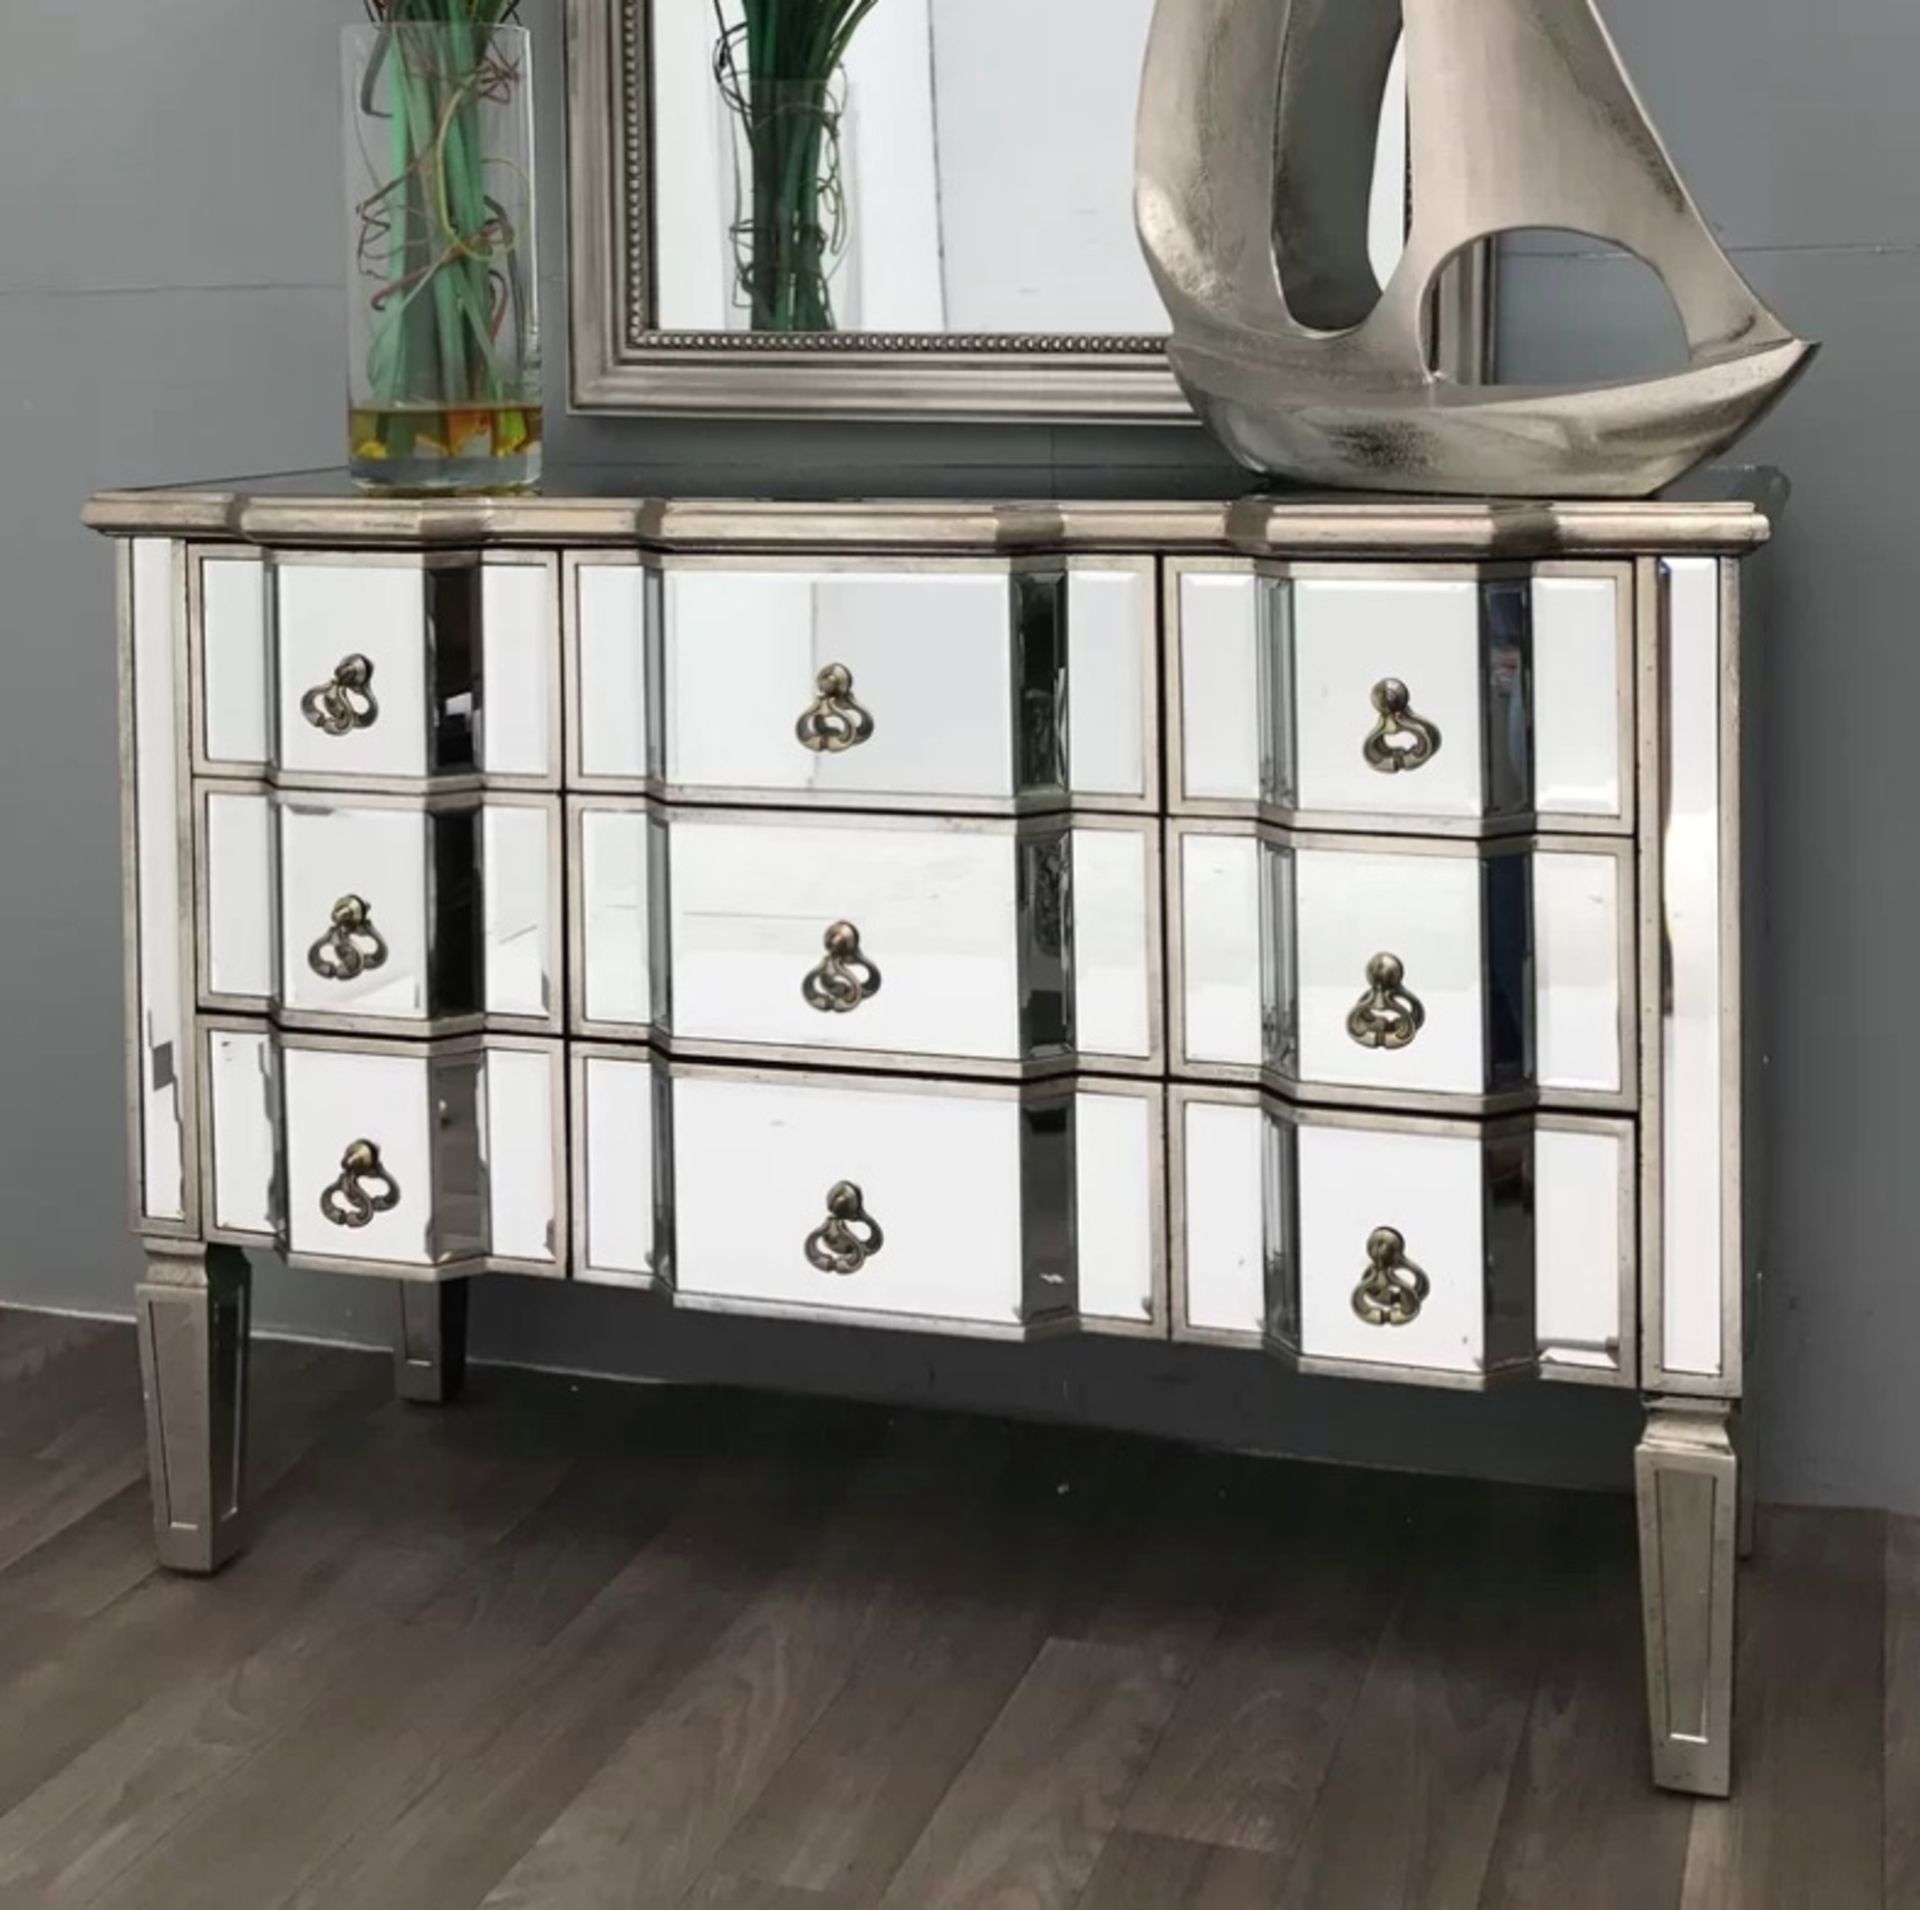 Glamourous 9 Drawer Chest Gold/Mirrored 9 Drawer Dresser Inspired By The Golden Age Of Hollywood,